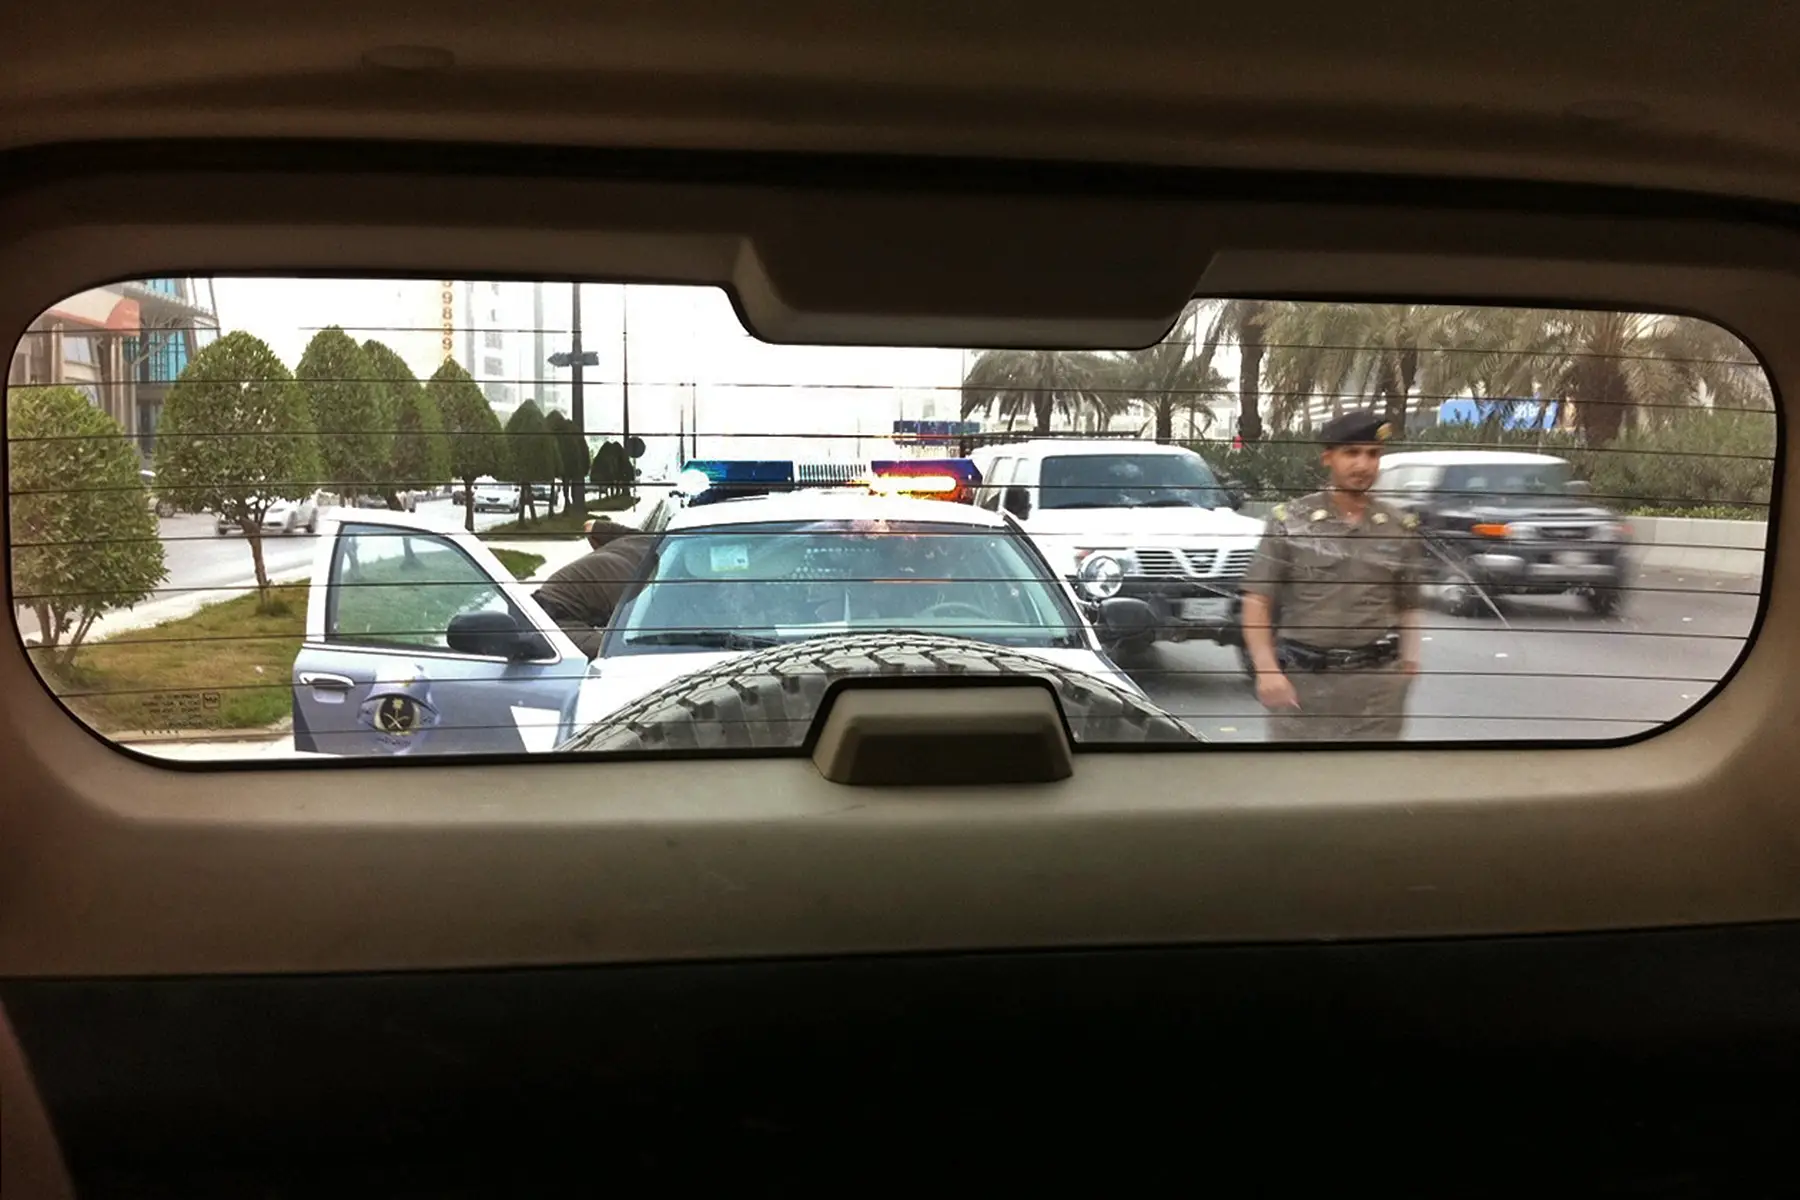 Police in Saudi Arabia approaching a car they pulled over